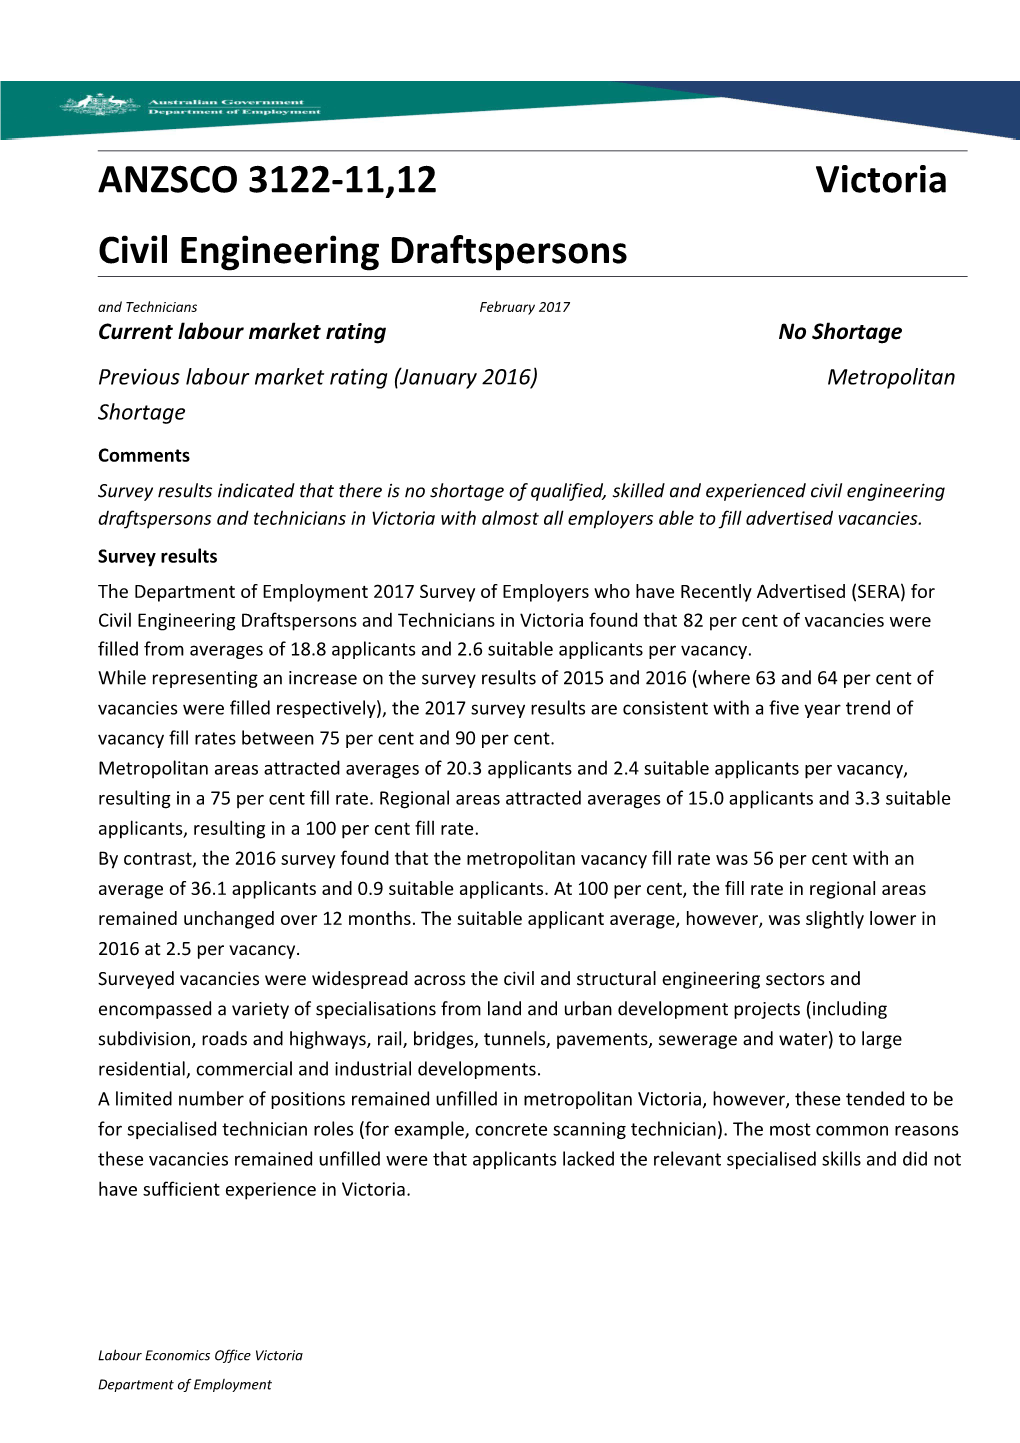 Civil Engineering Draftspersons and Technicians Victoria